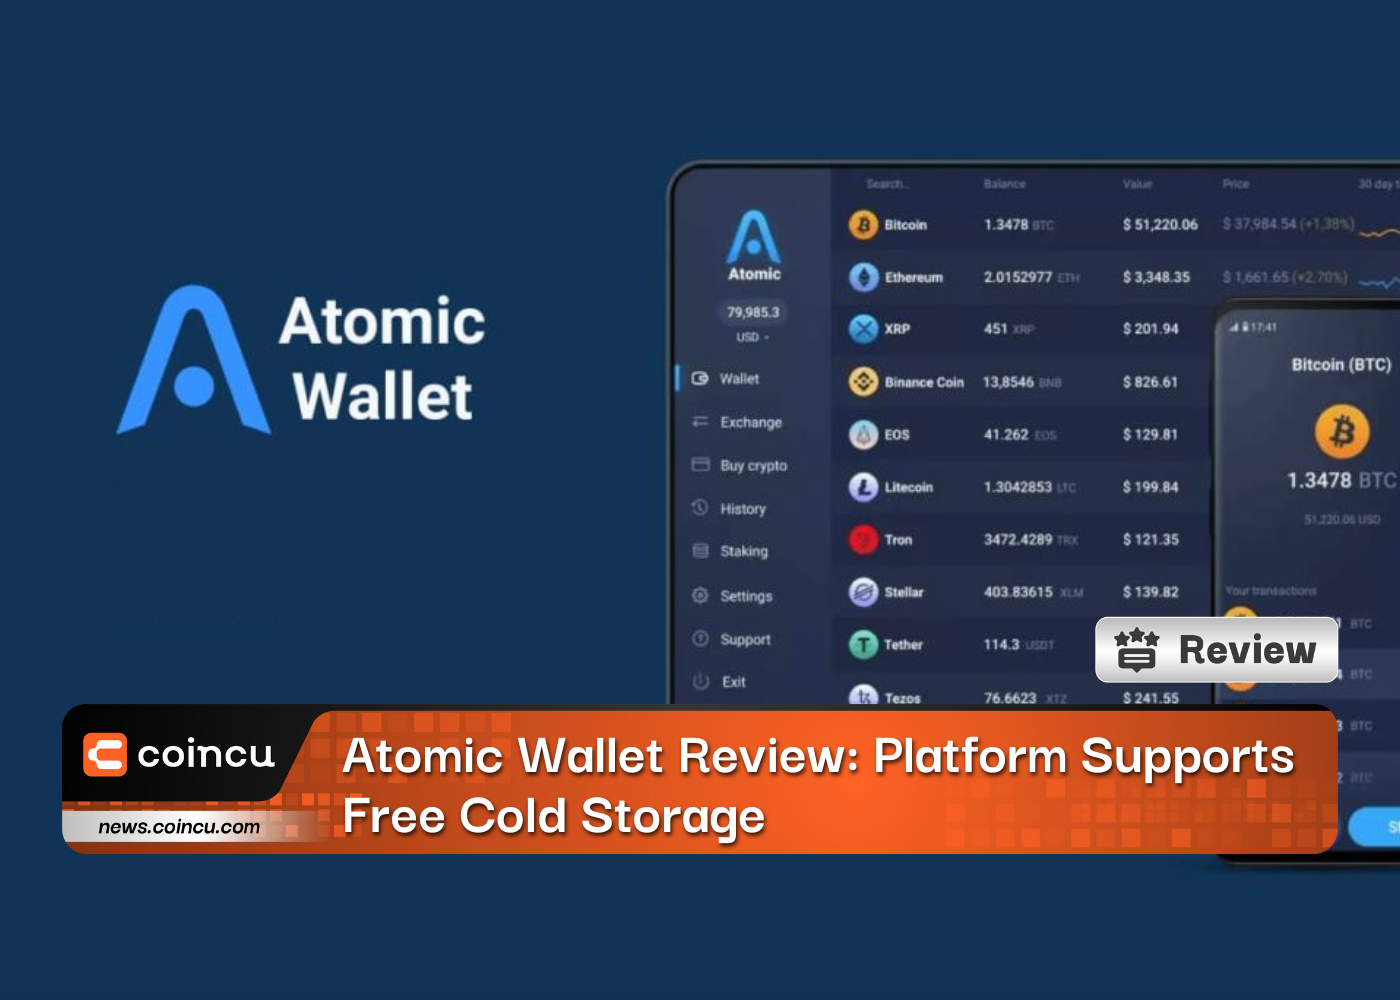 Atomic Wallet Review: Platform Supports Free Cold Storage